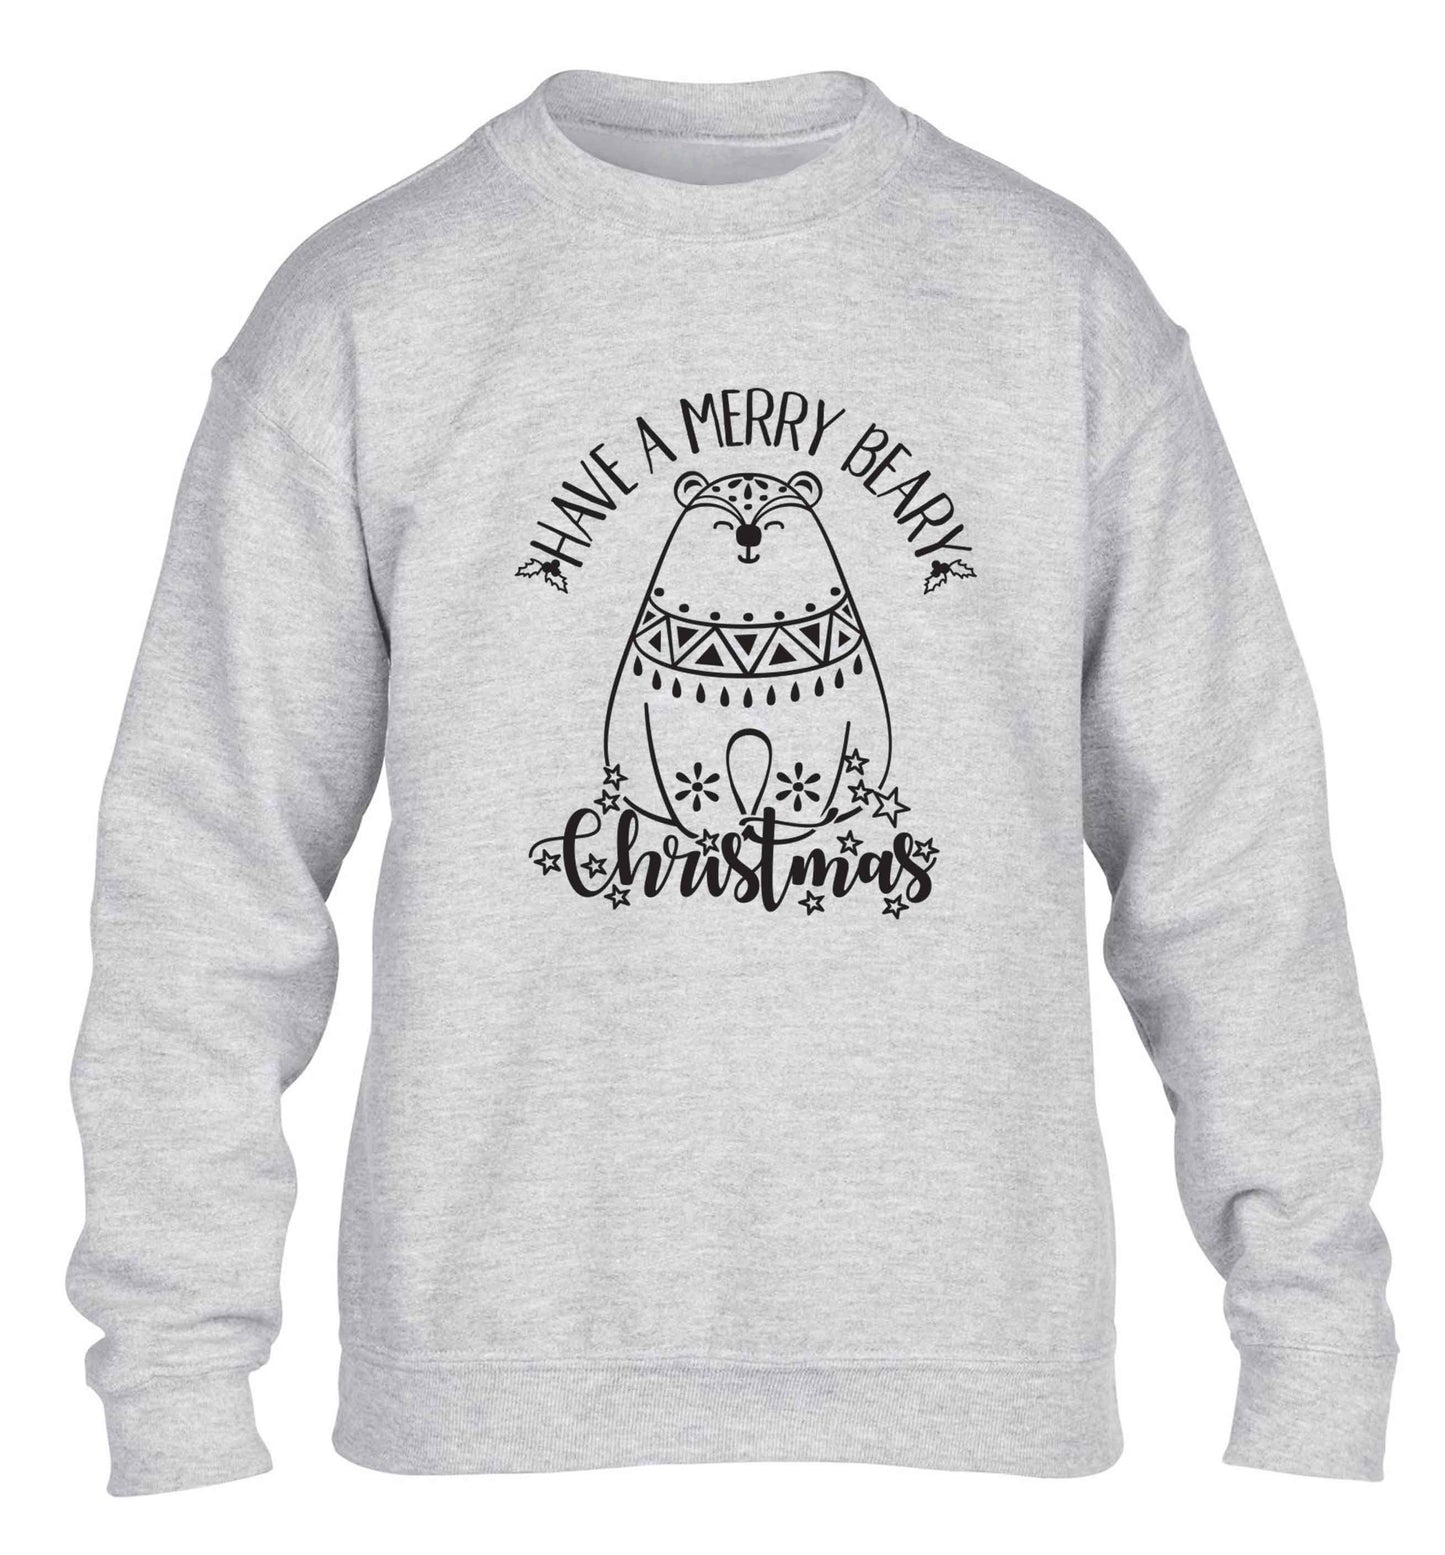 Have a merry beary Christmas children's grey sweater 12-13 Years